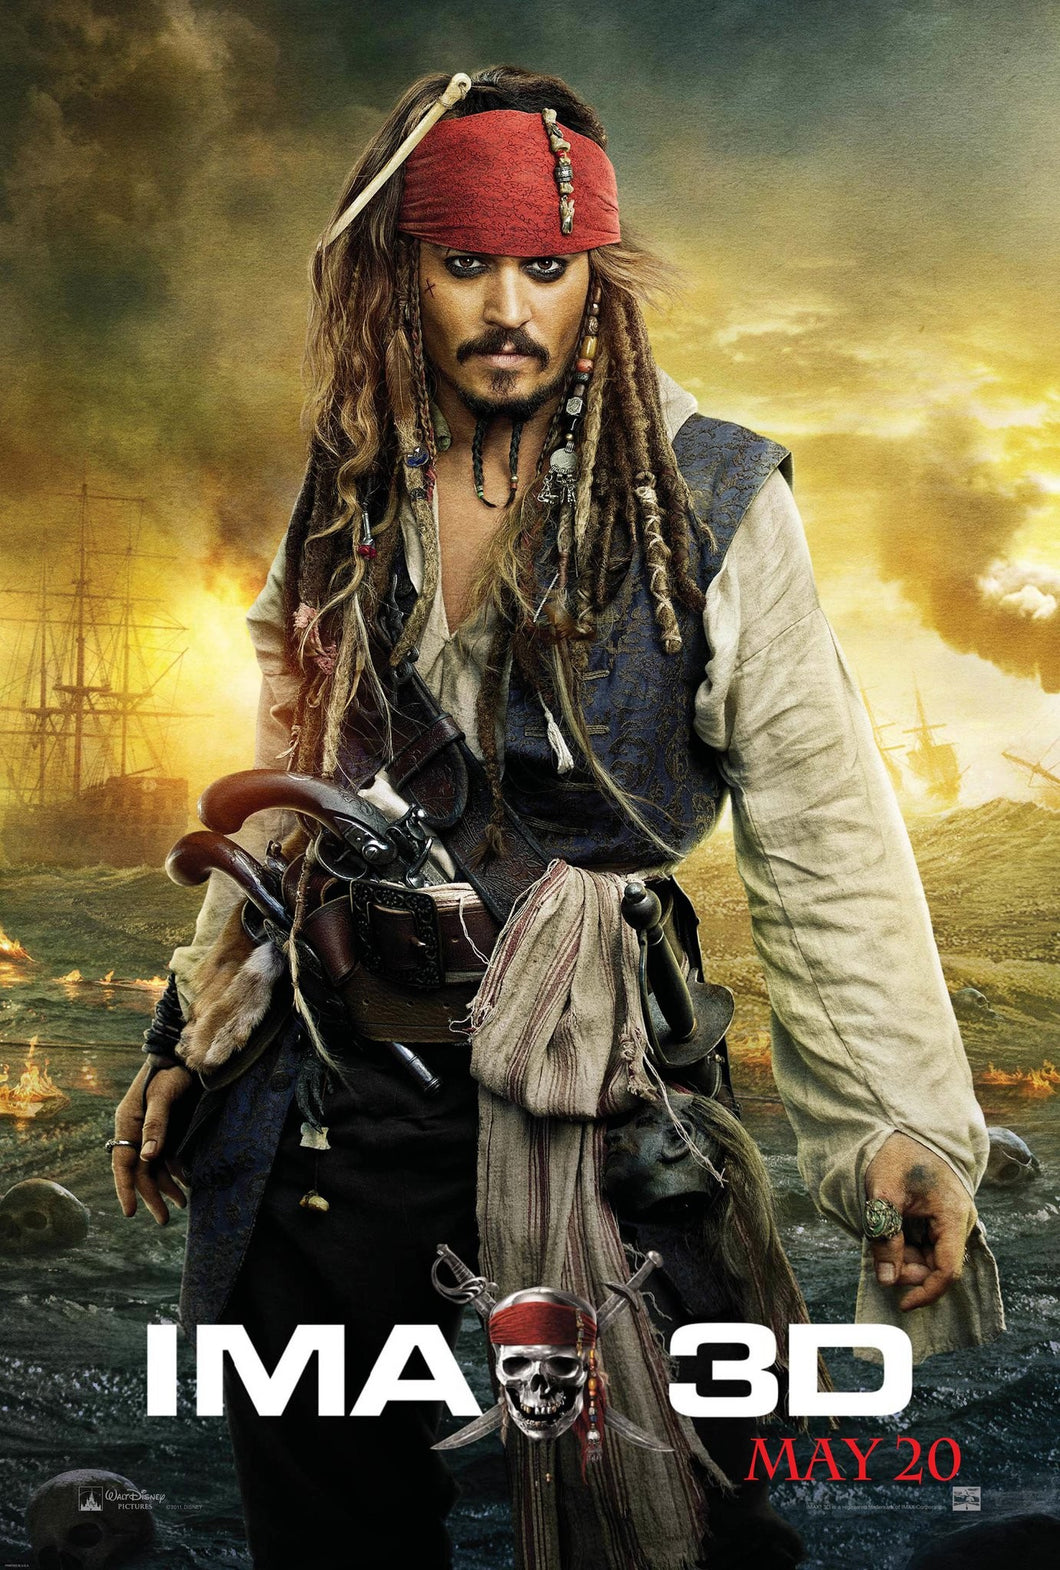 Poster Pelicula Pirates of the Caribbean: On Stranger Tides (2011)